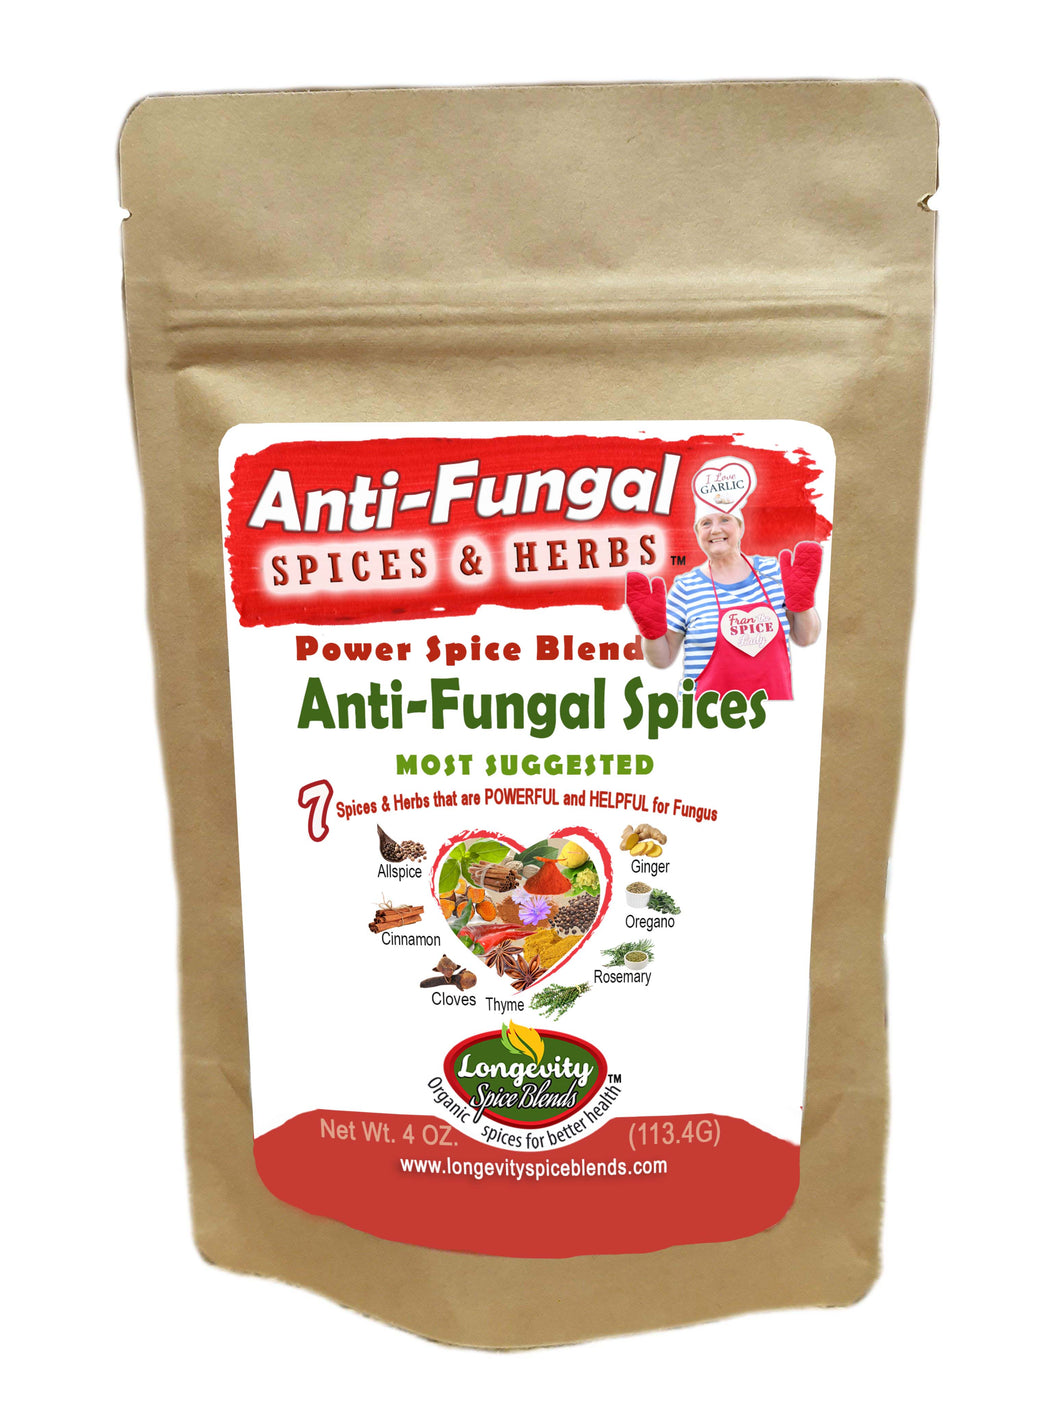 Fungus Fighter  - Anti-Fungal Spice & Herb Blend for Fungal Infection Relief